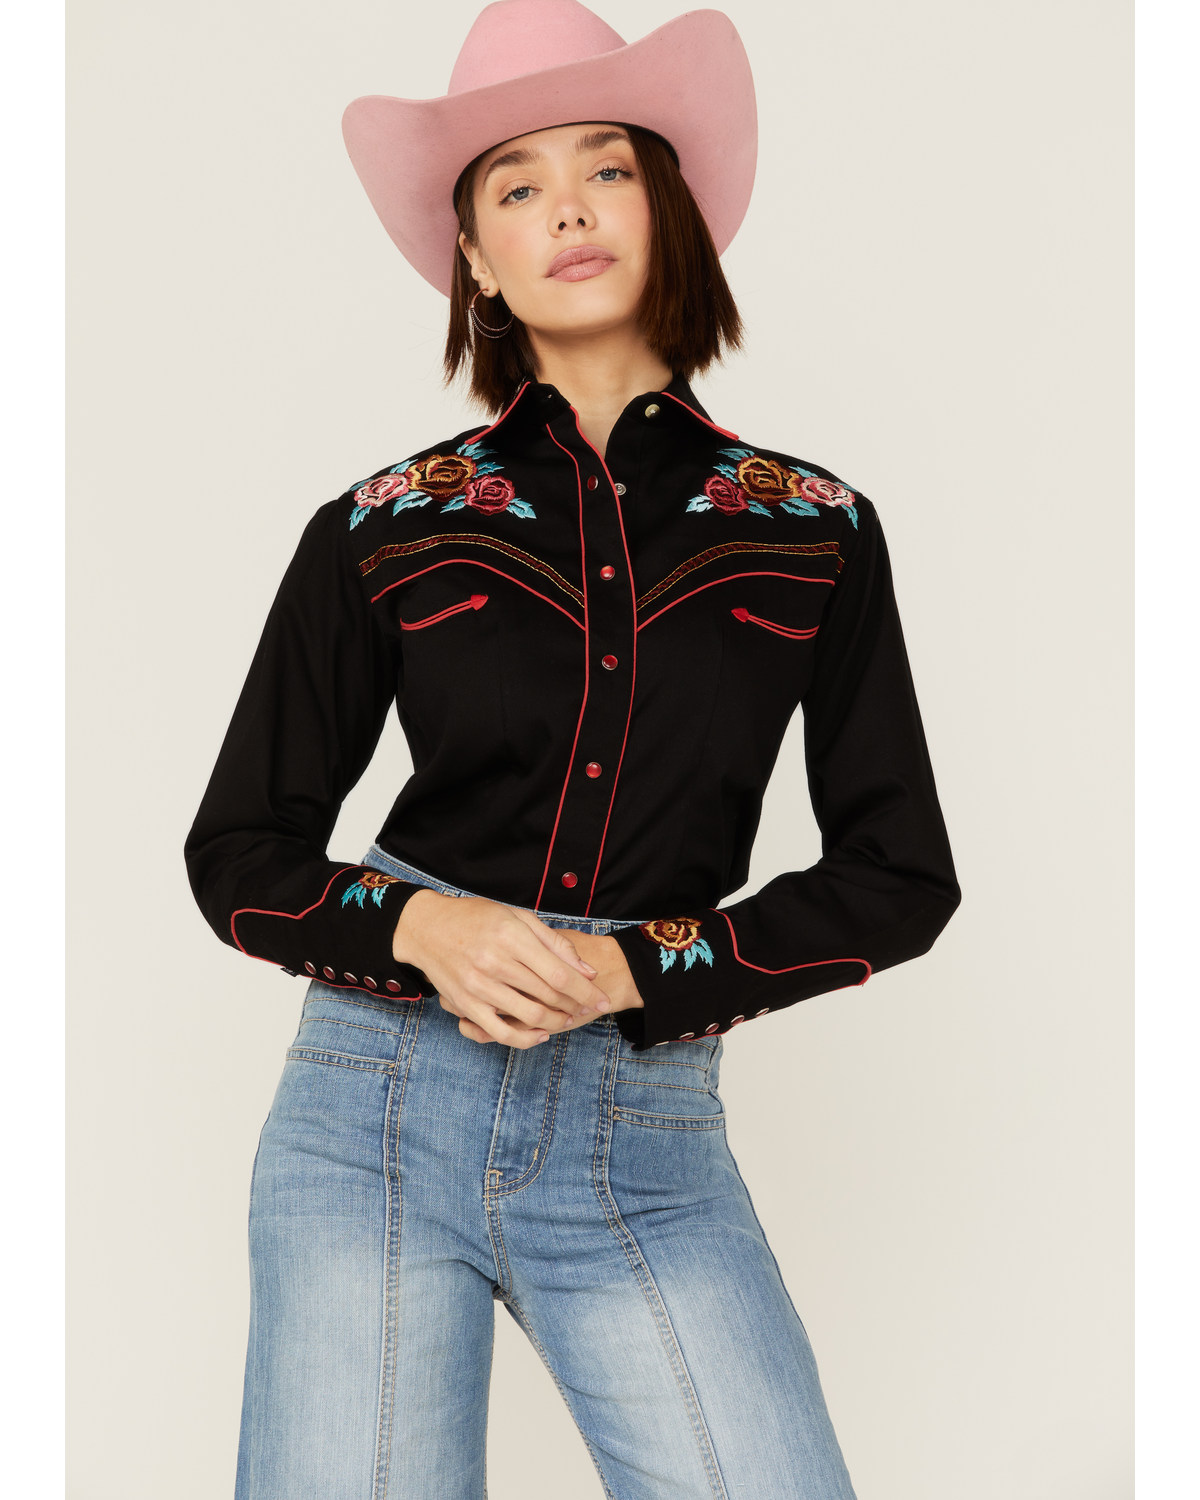 Rockmount Ranchwear Women's Vintage Rose Bouquet Embroidered Pearl Snap Western Shirt